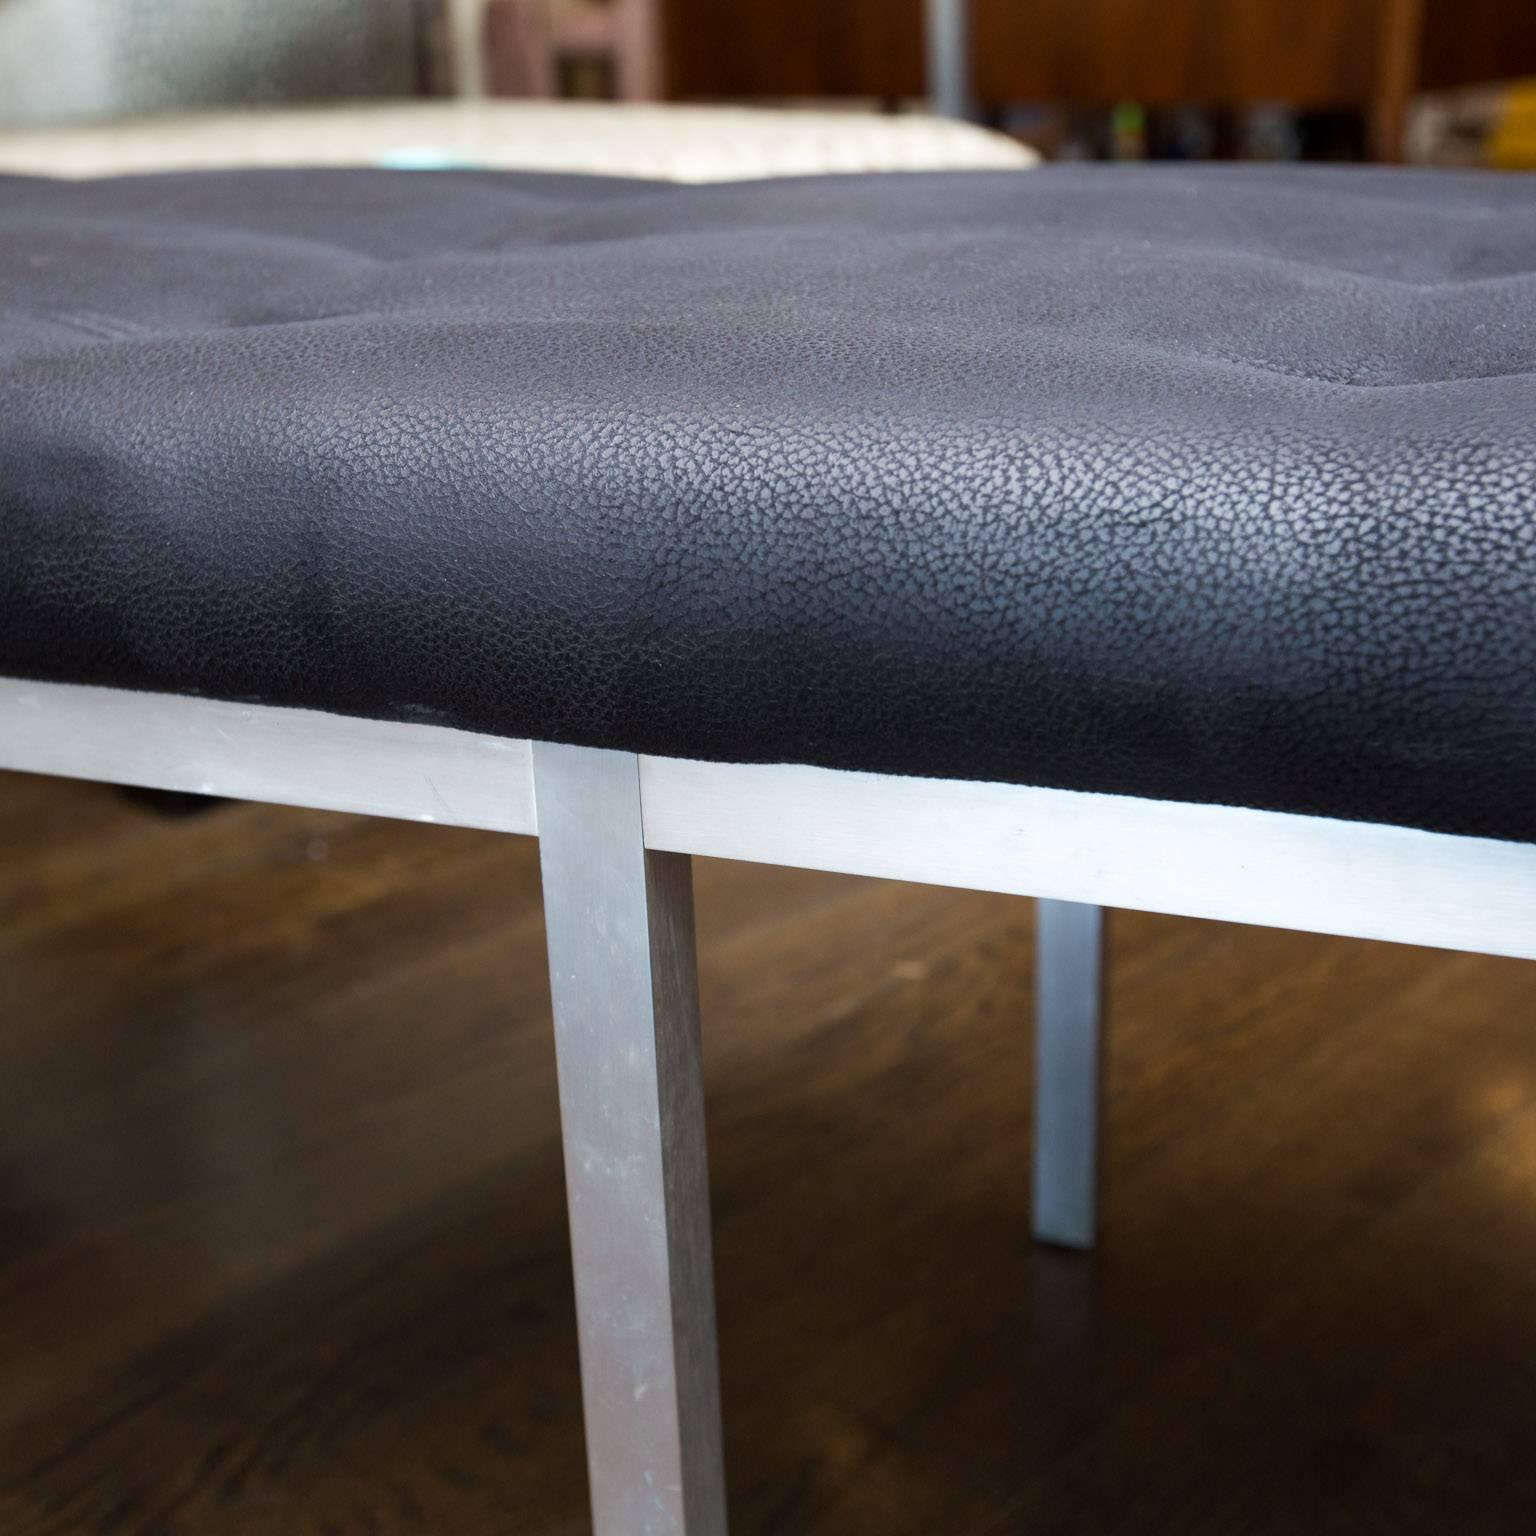 Knoll-style bench by 1970s furniture house JG furniture in newly reupholstered faux ostrich skin ultra suede.